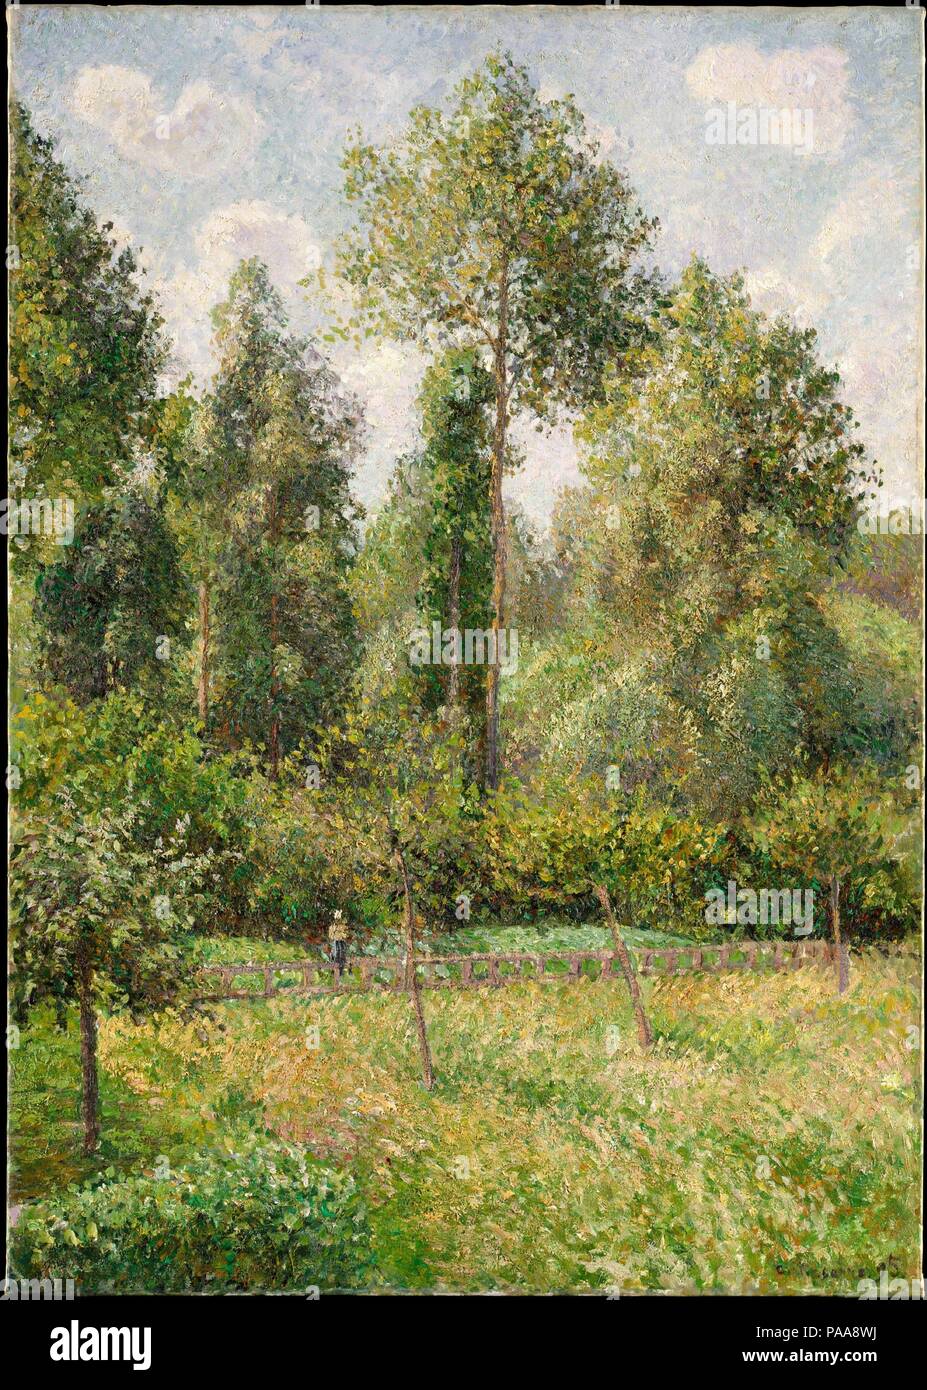 Poplars, Éragny. Artist: Camille Pissarro (French, Charlotte Amalie, Saint Thomas 1830-1903 Paris). Dimensions: 36 1/2 x 25 1/2 in. (92.7 x 64.8 cm). Date: 1895.  This canvas of summer 1895 shows a corner of Pissarro's garden at Éragny, a small village in northern France where he lived from 1884 until his death. Pissarro likely painted this view from his studio window, as a persistent eye ailment hampered him from working outdoors. The picture was among the works that Pissarro sold in November to the dealer Durand-Ruel, who included it in a major exhibition of the artist's work the following s Stock Photo